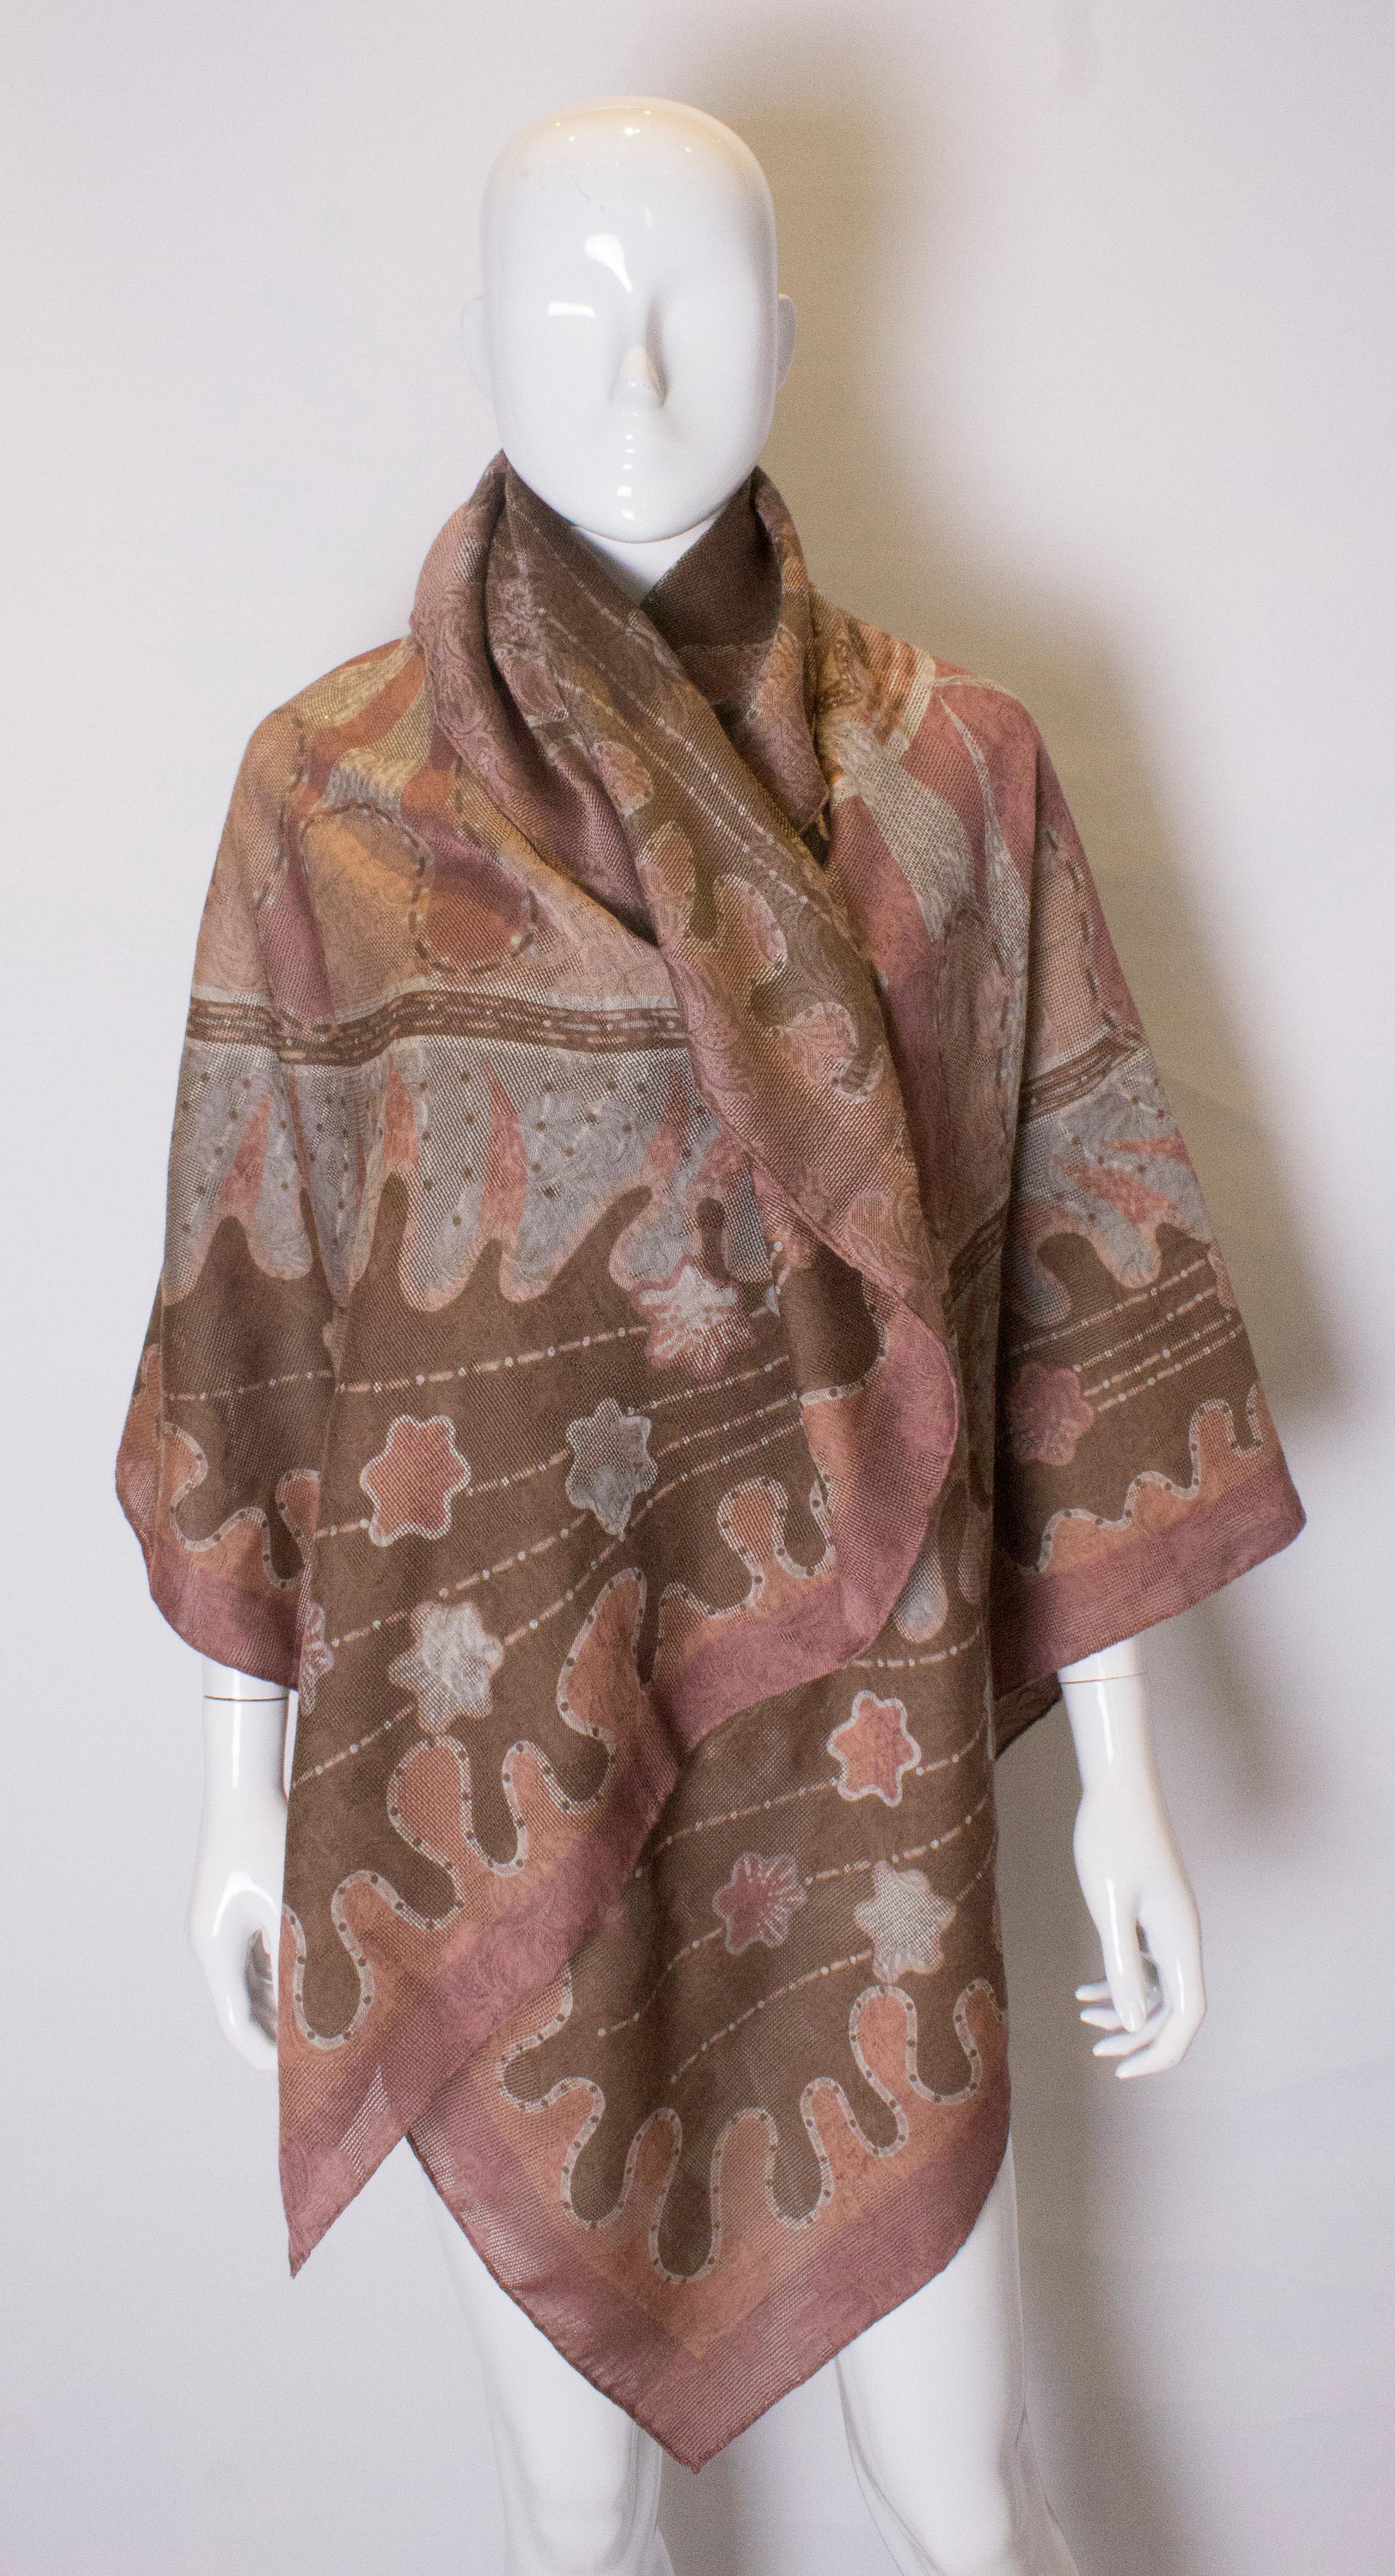 A large silk and wool  ( 70 % WOOL, 30 % silk ) shawl by Zandra Rhodes. The shawl is in a pretty plum and grey colour with pattern. It has  hand rolled edges, and was made in Italy.
Measurements: width 56'', length 110''

